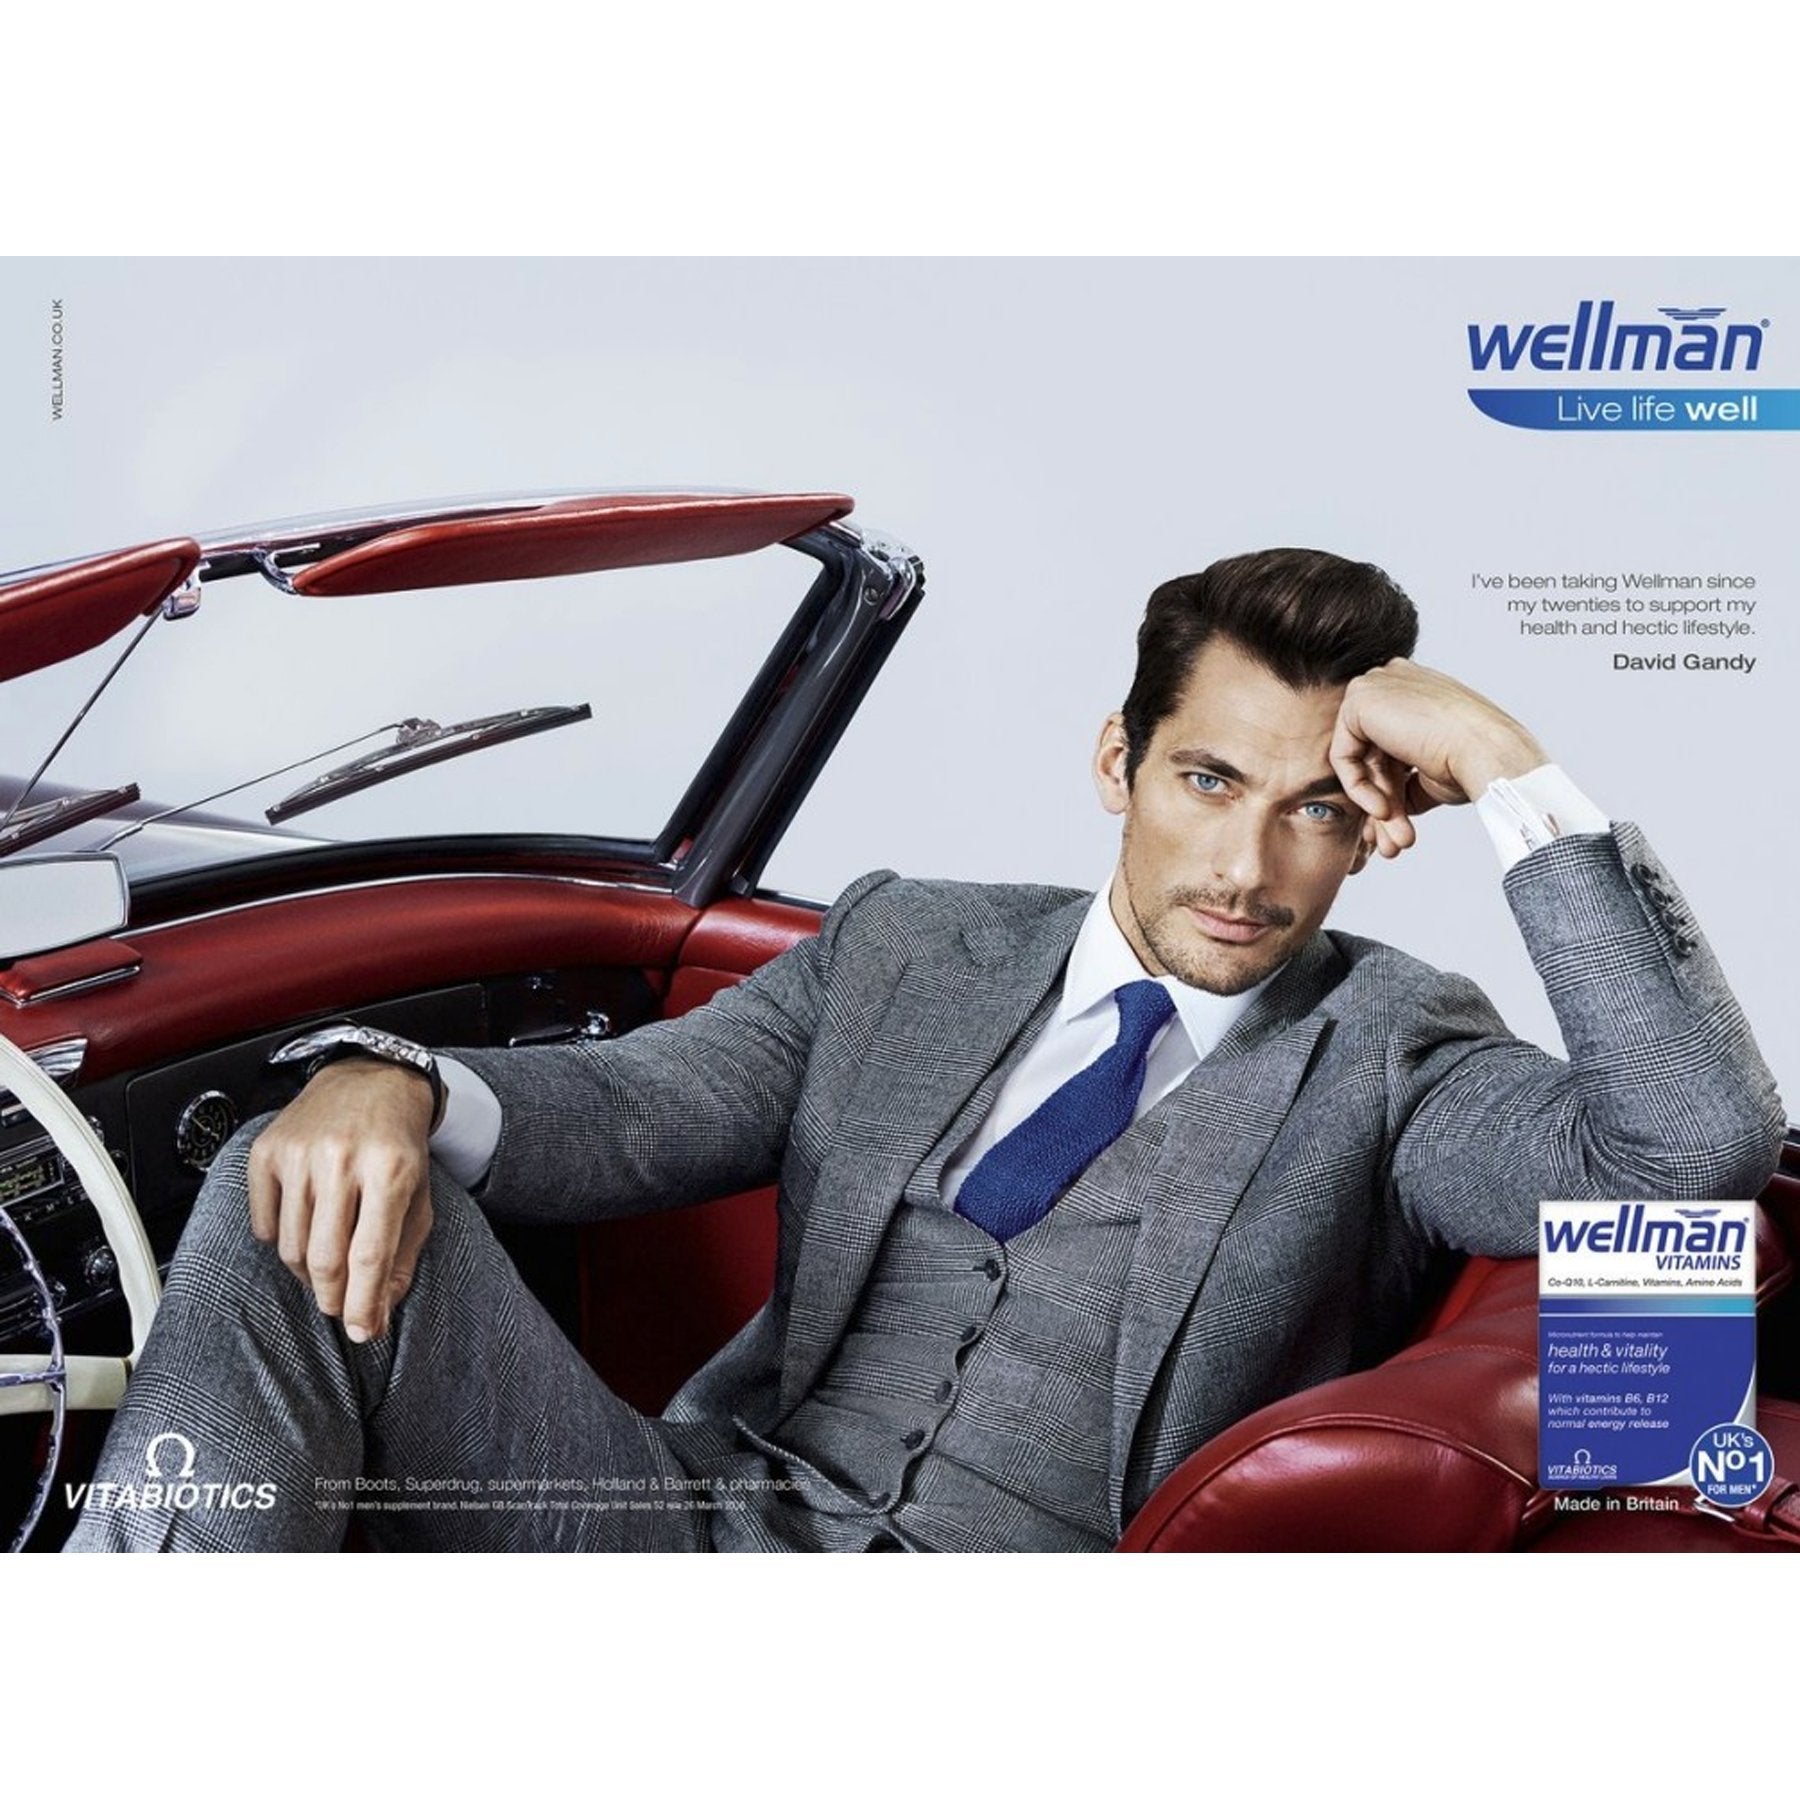 David Gandy advertises Wellman wearing Emma Willis White Superior Double Cuff Swiss Cotton shirt and silk tie on the front page of The Telegraph throughout August. - Emma Willis